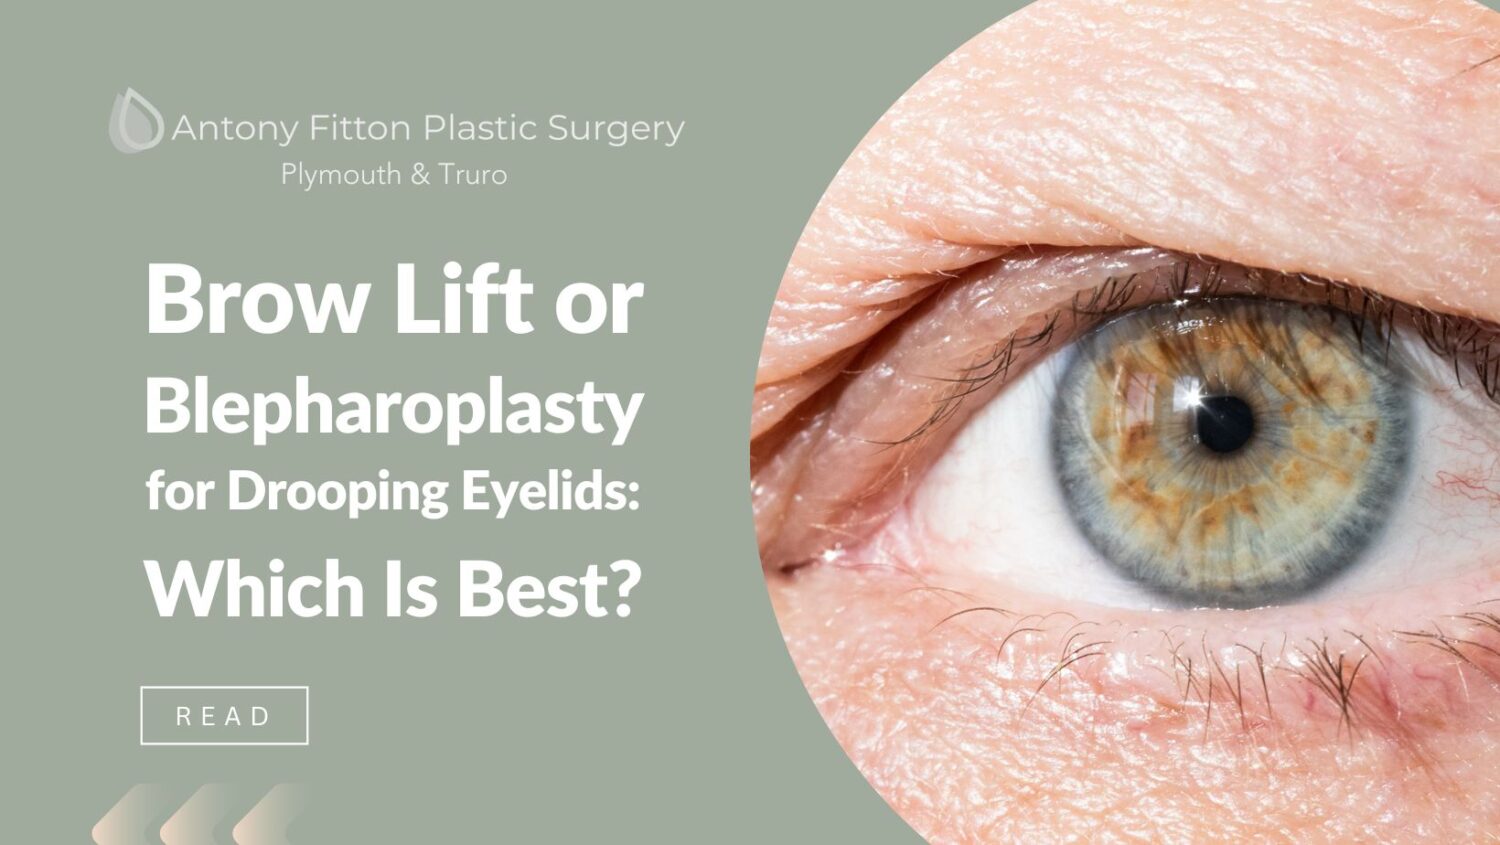 Brow Lift or Blepharoplasty for Drooping Eyelids: Which Is Best?